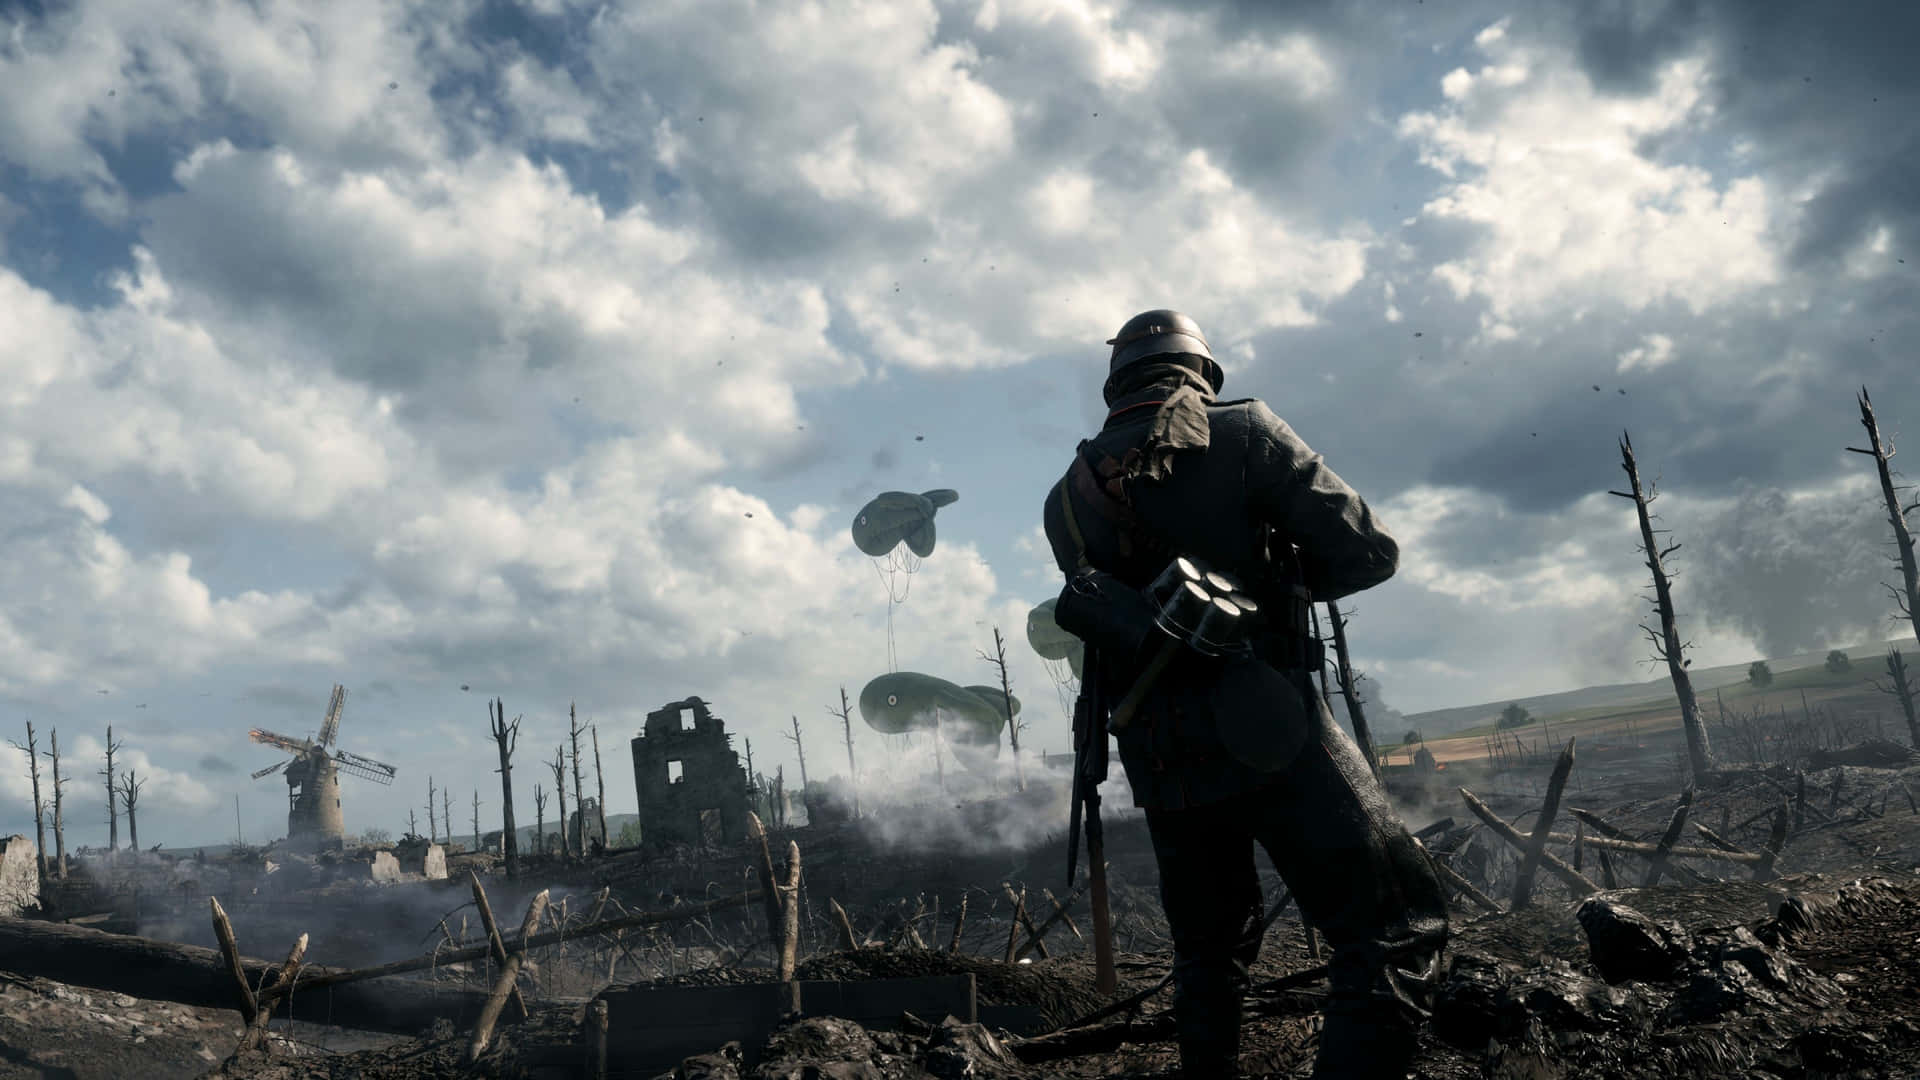 A Soldier Is Standing In A Field With Smoke Coming From It